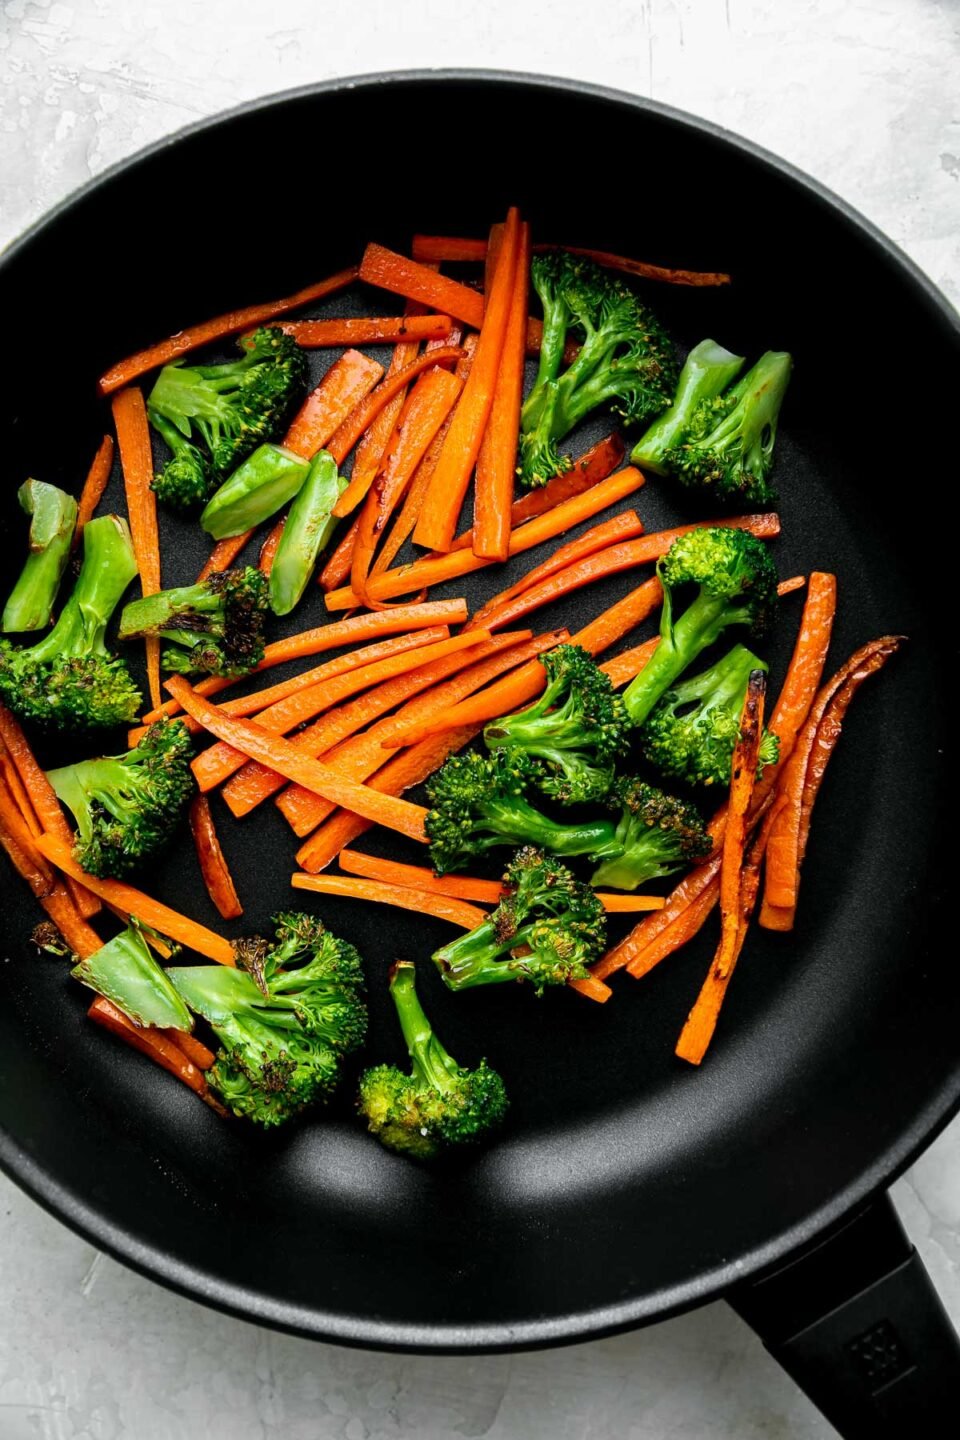 Broccoli cut into bite-sized florets and carrot sliced into strips cook in a black Zwilling Madura Nonstick Skillet in oil. The skillet sits atop a creamy white textured surface.